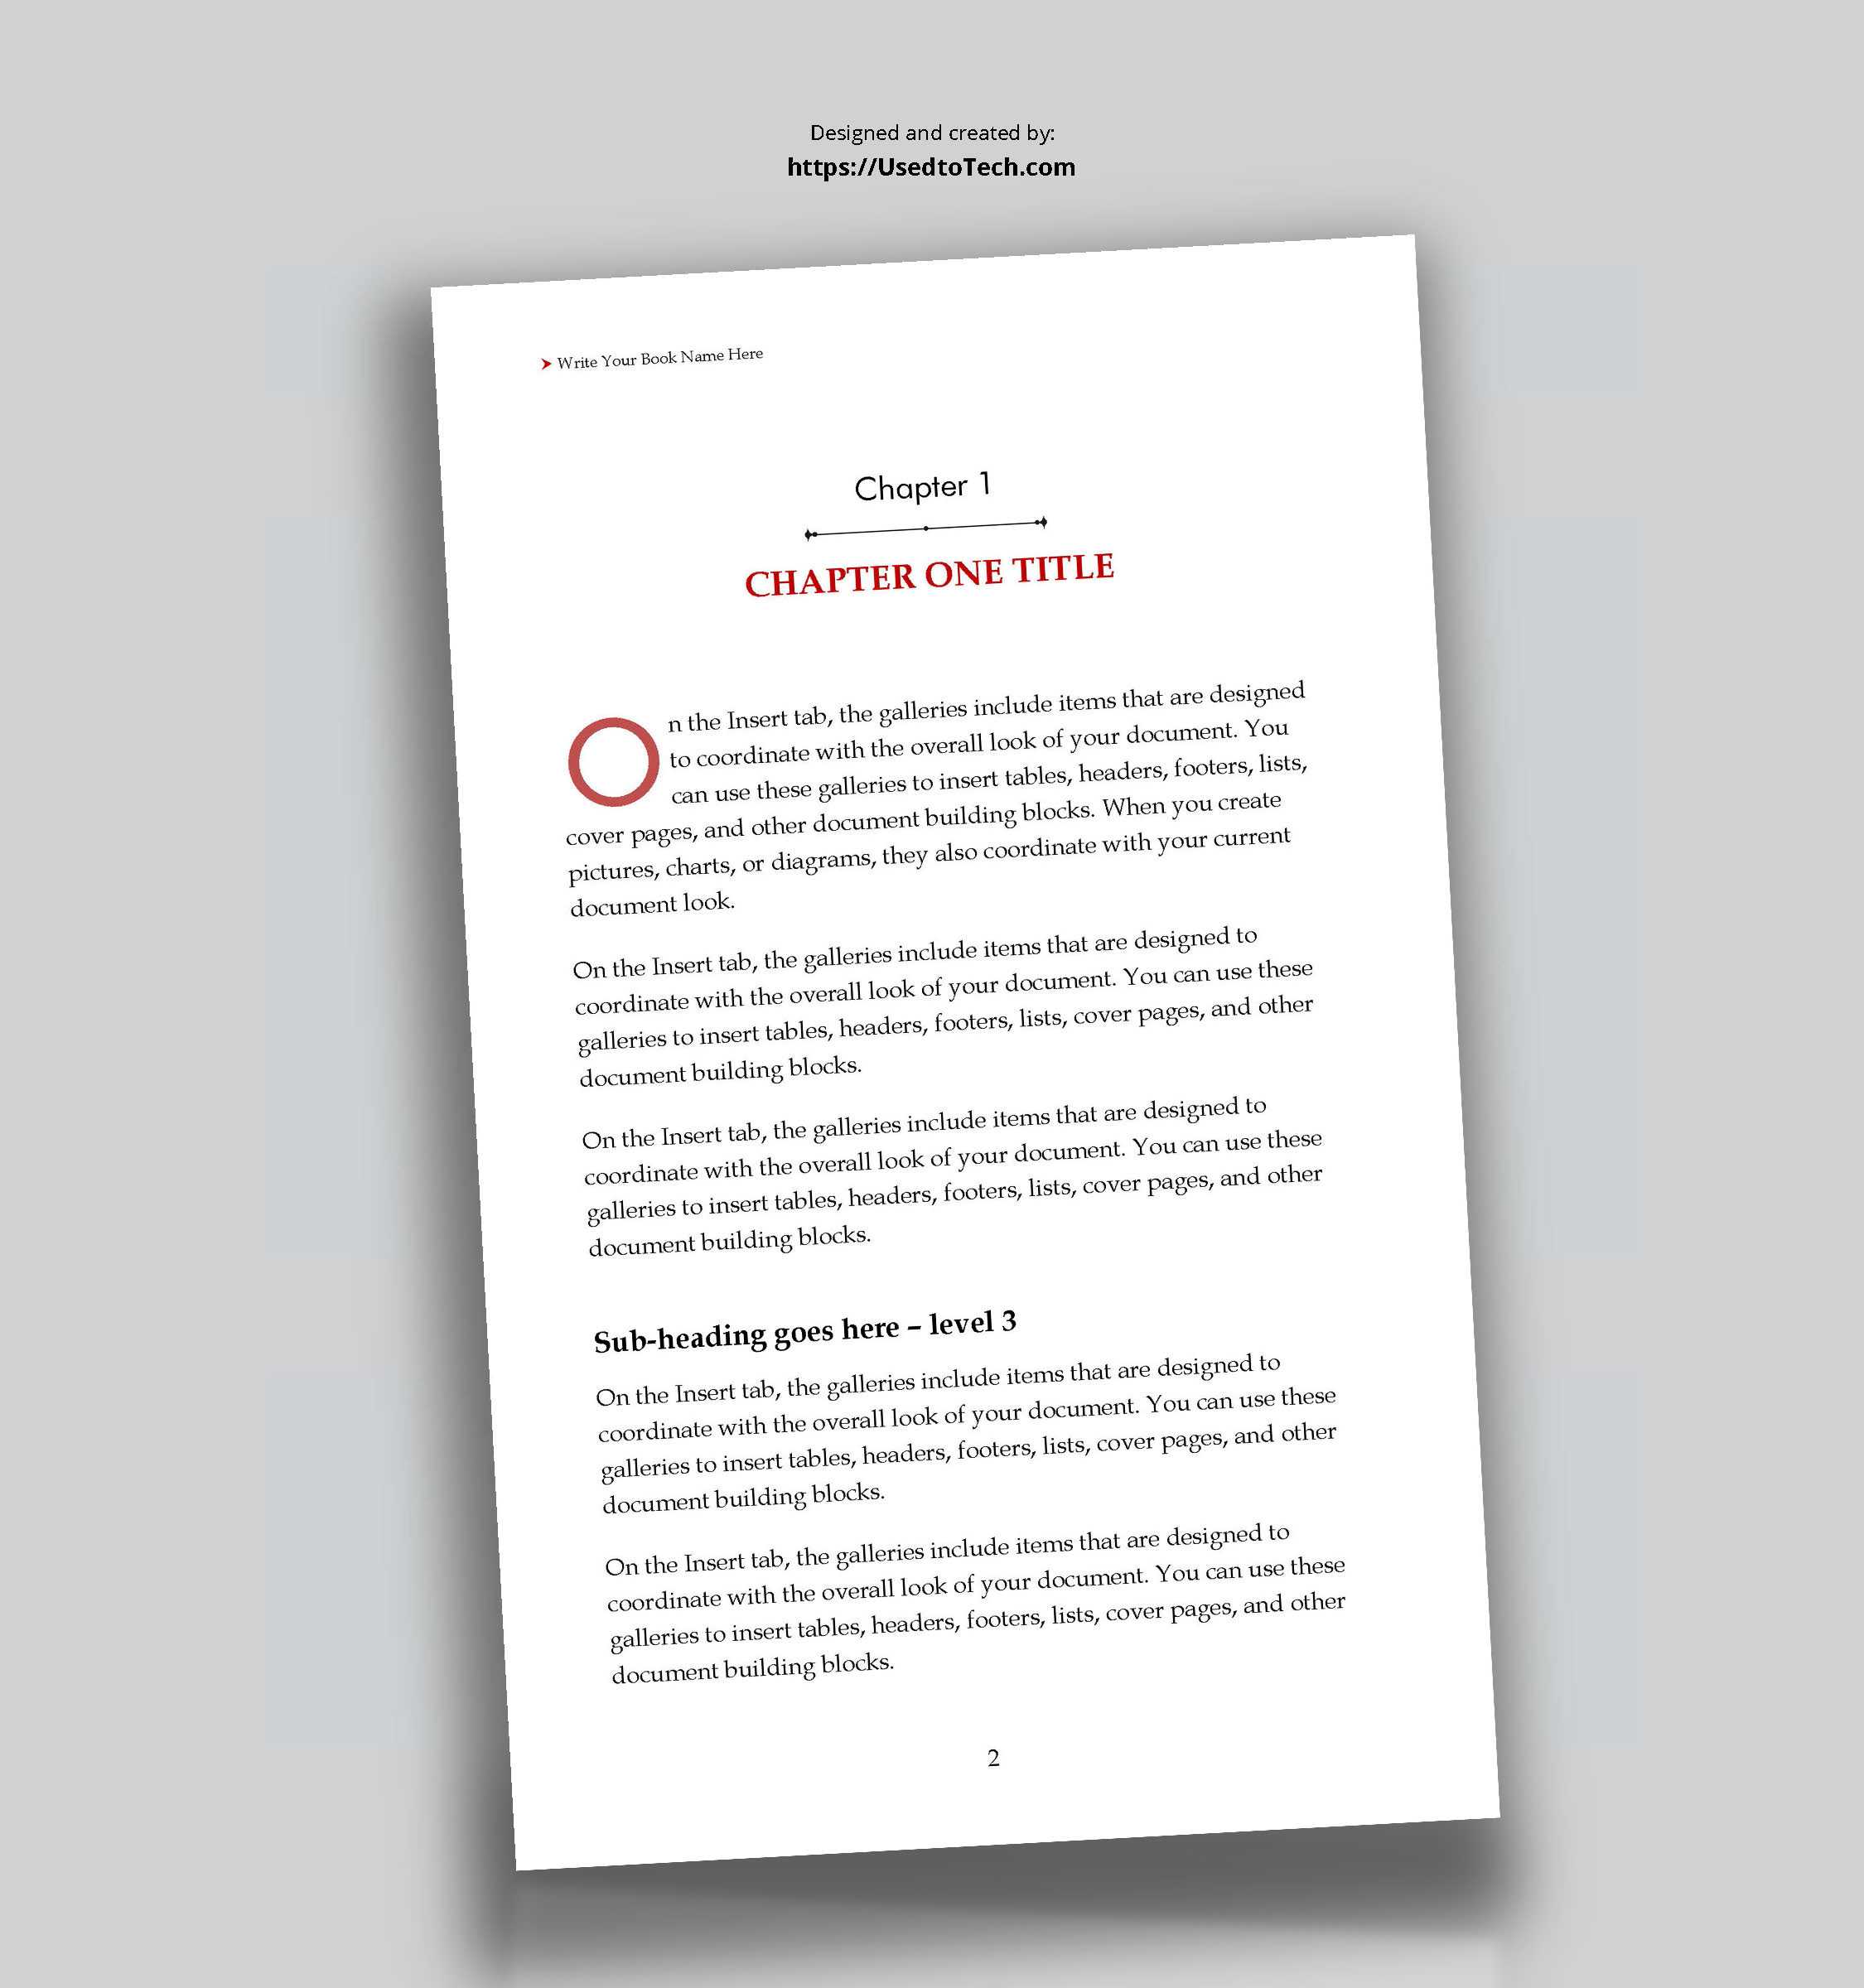 5 X 8 Editable Book Template In Word – Used To Tech For How To Create A Book Template In Word